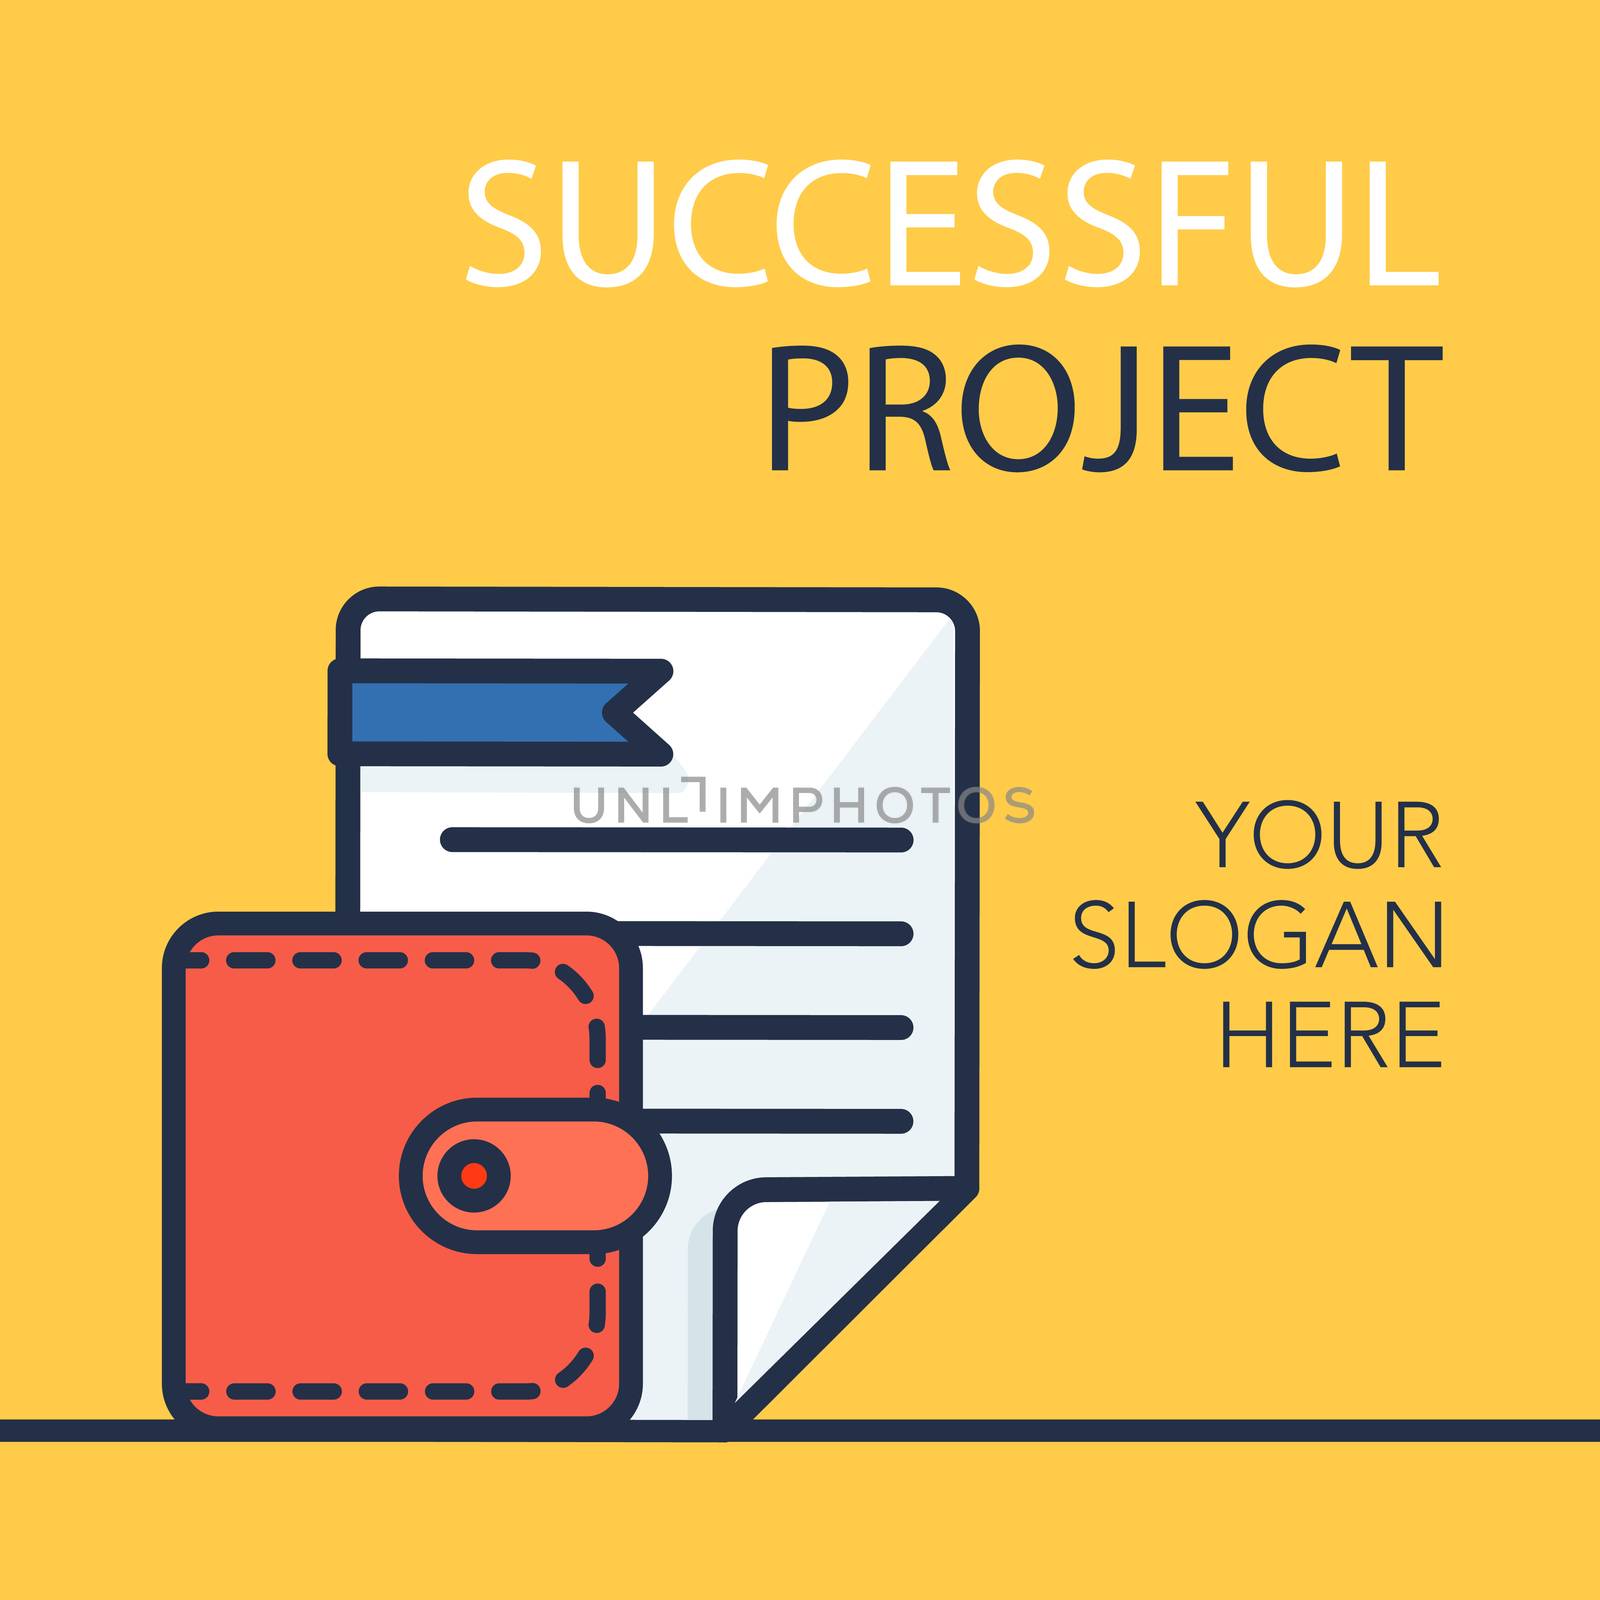 Successful Project Banner by barsrsind